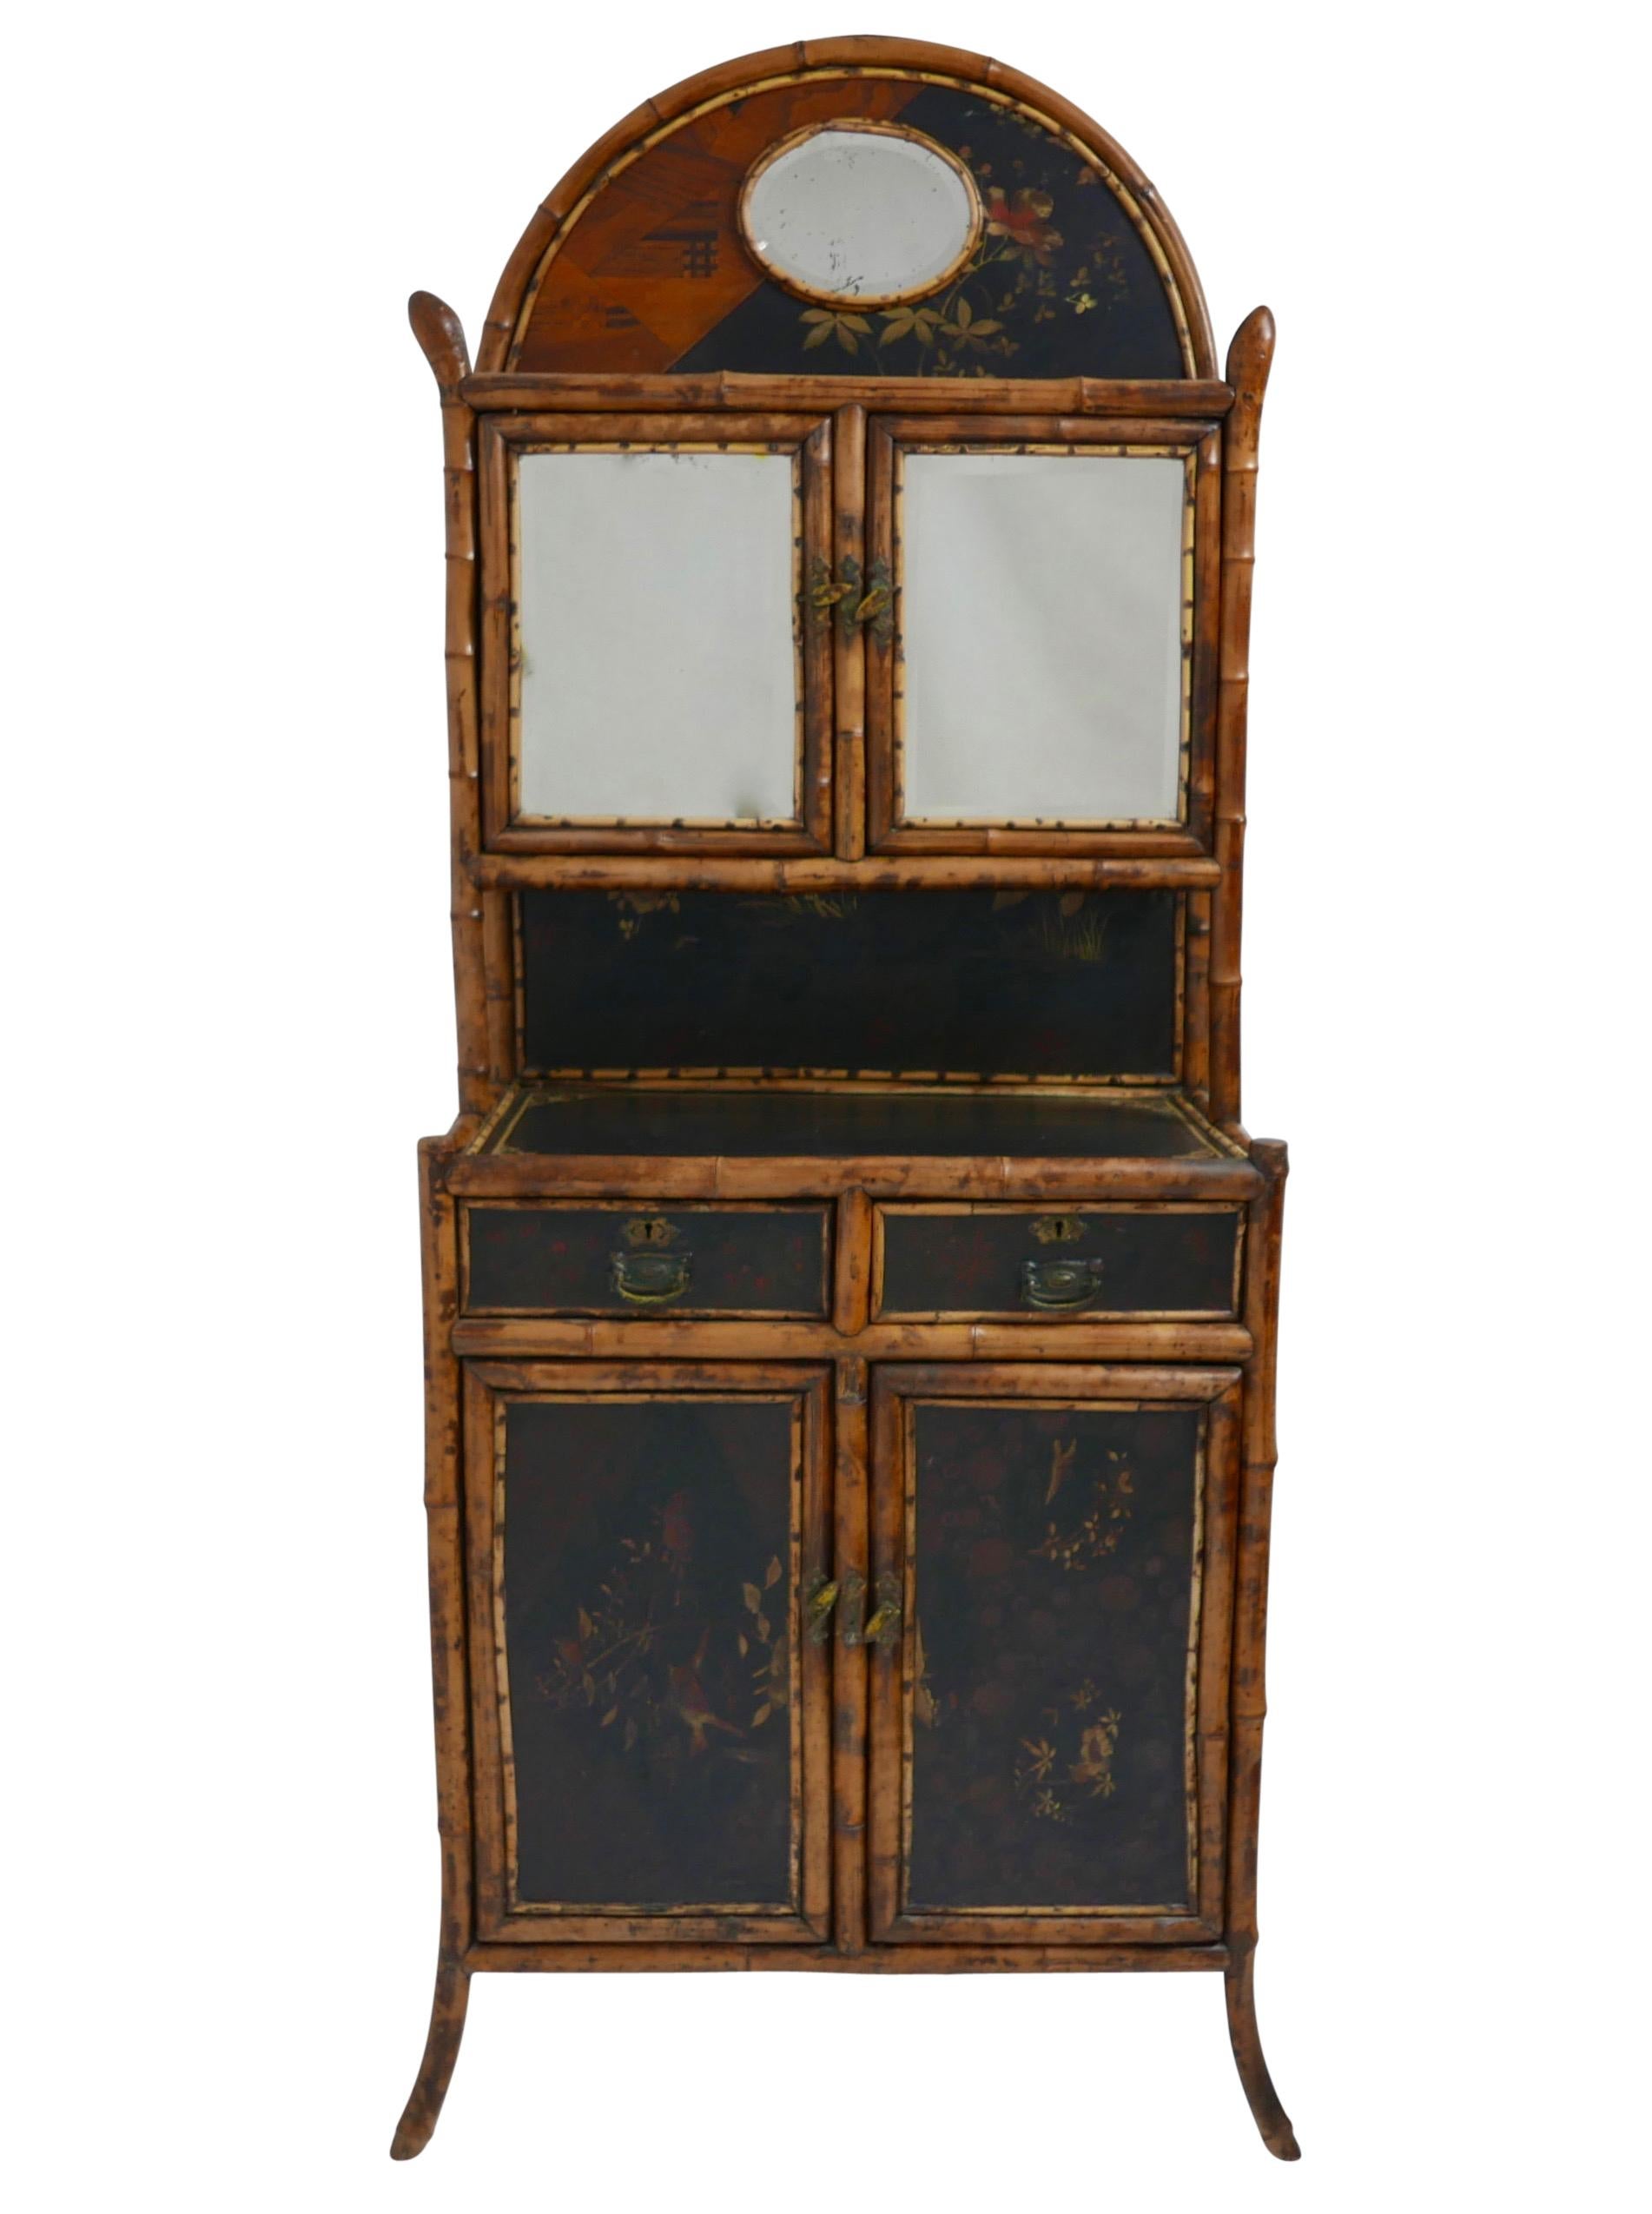 Completely original Bamboo cabinet with lacquer panels, beveled glass mirrors, embossed paper panels on the sides bamboo root finials.
The arched top set with demi lune lacquer panel and oval beveled glass mirror above two beveled glass doors then